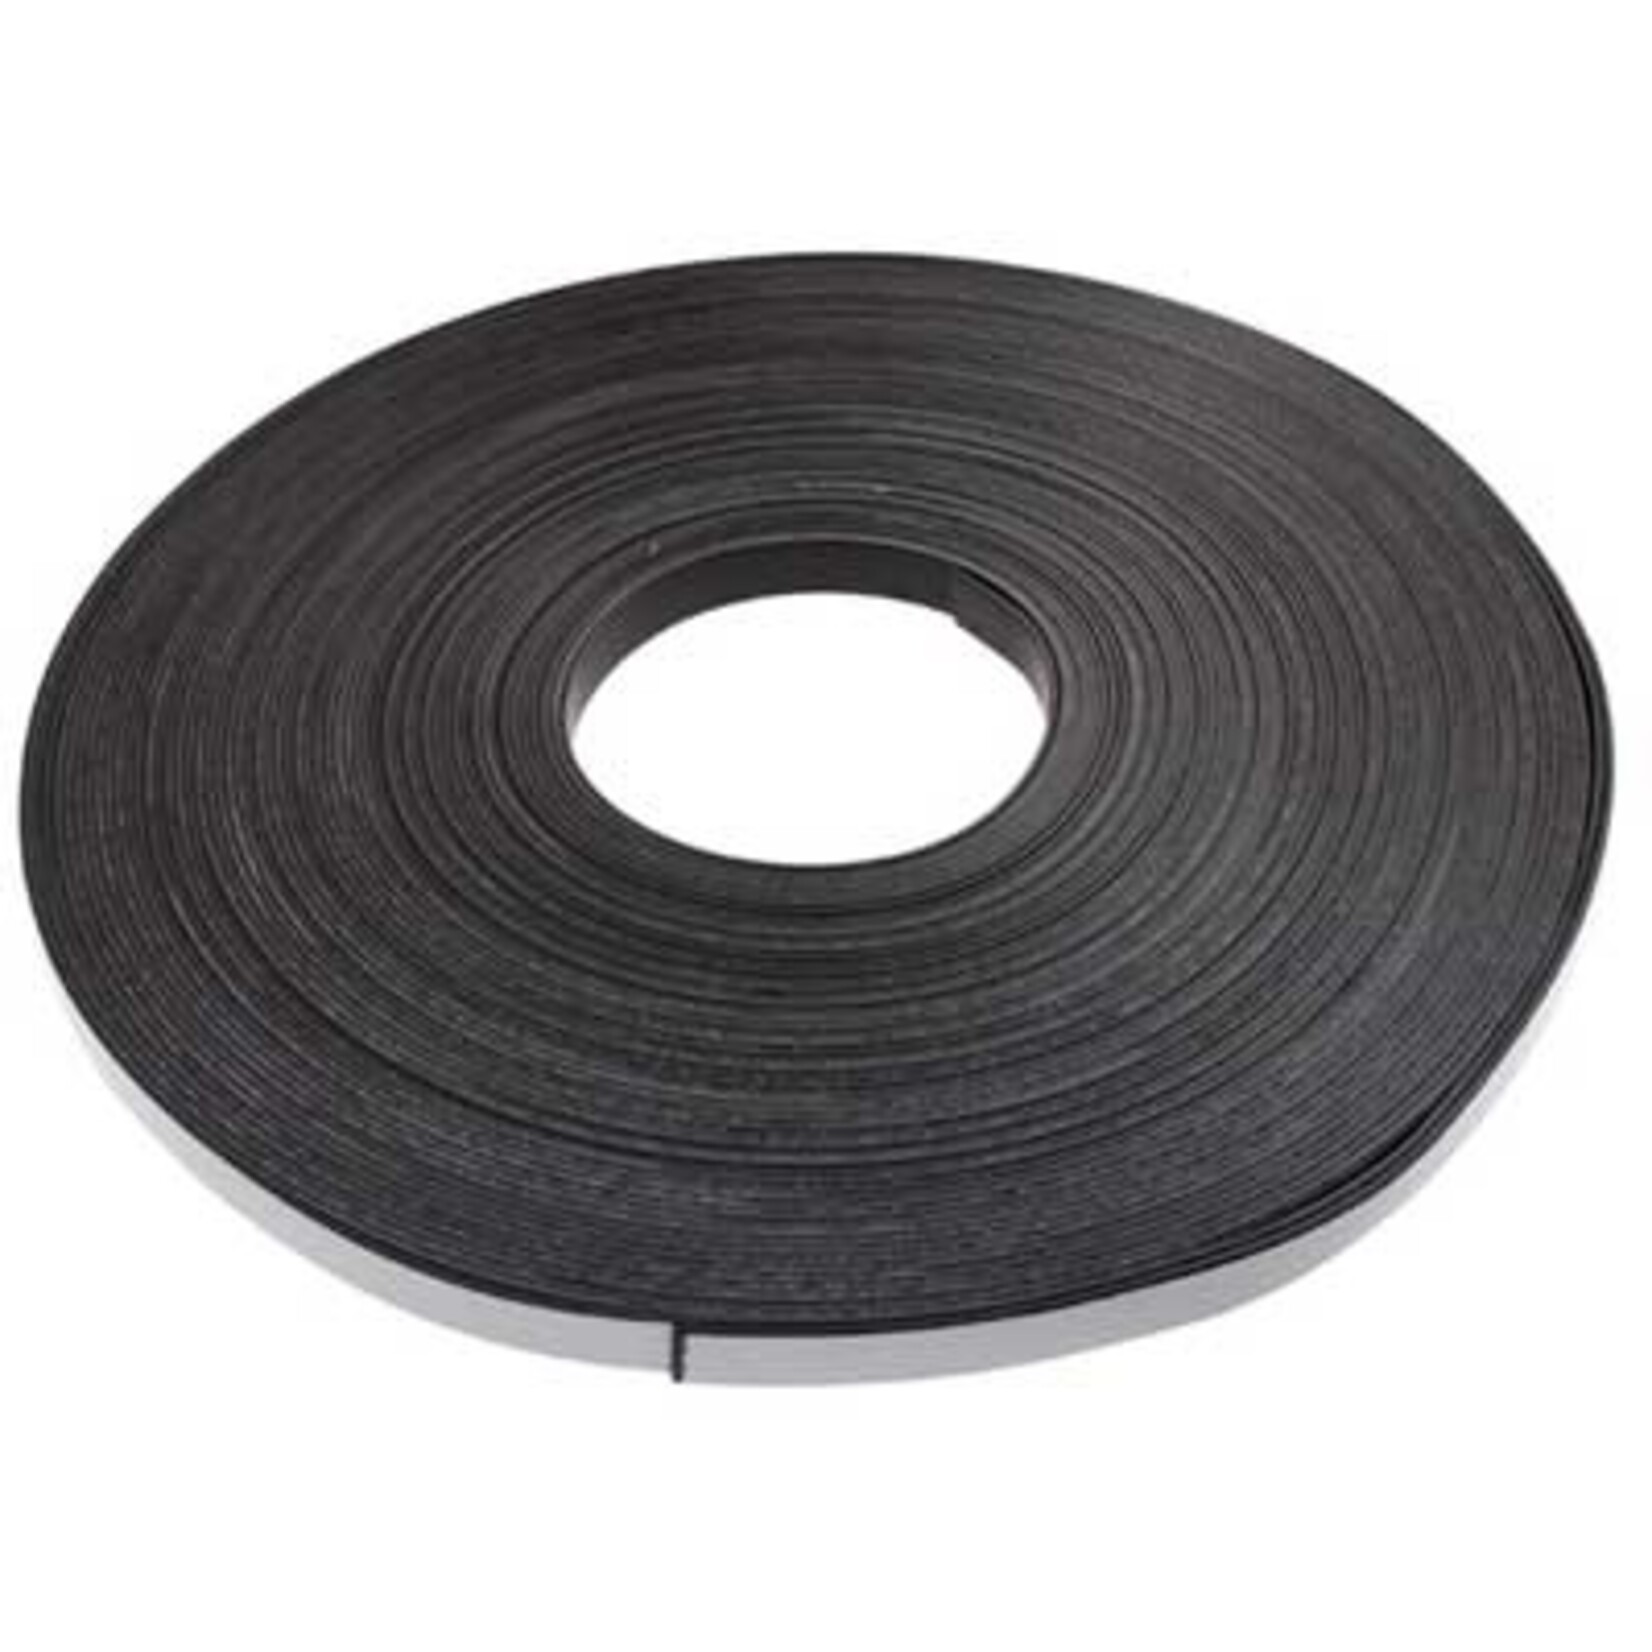 Magnetic Tape Adhesive 100Ft 0.5 Inch